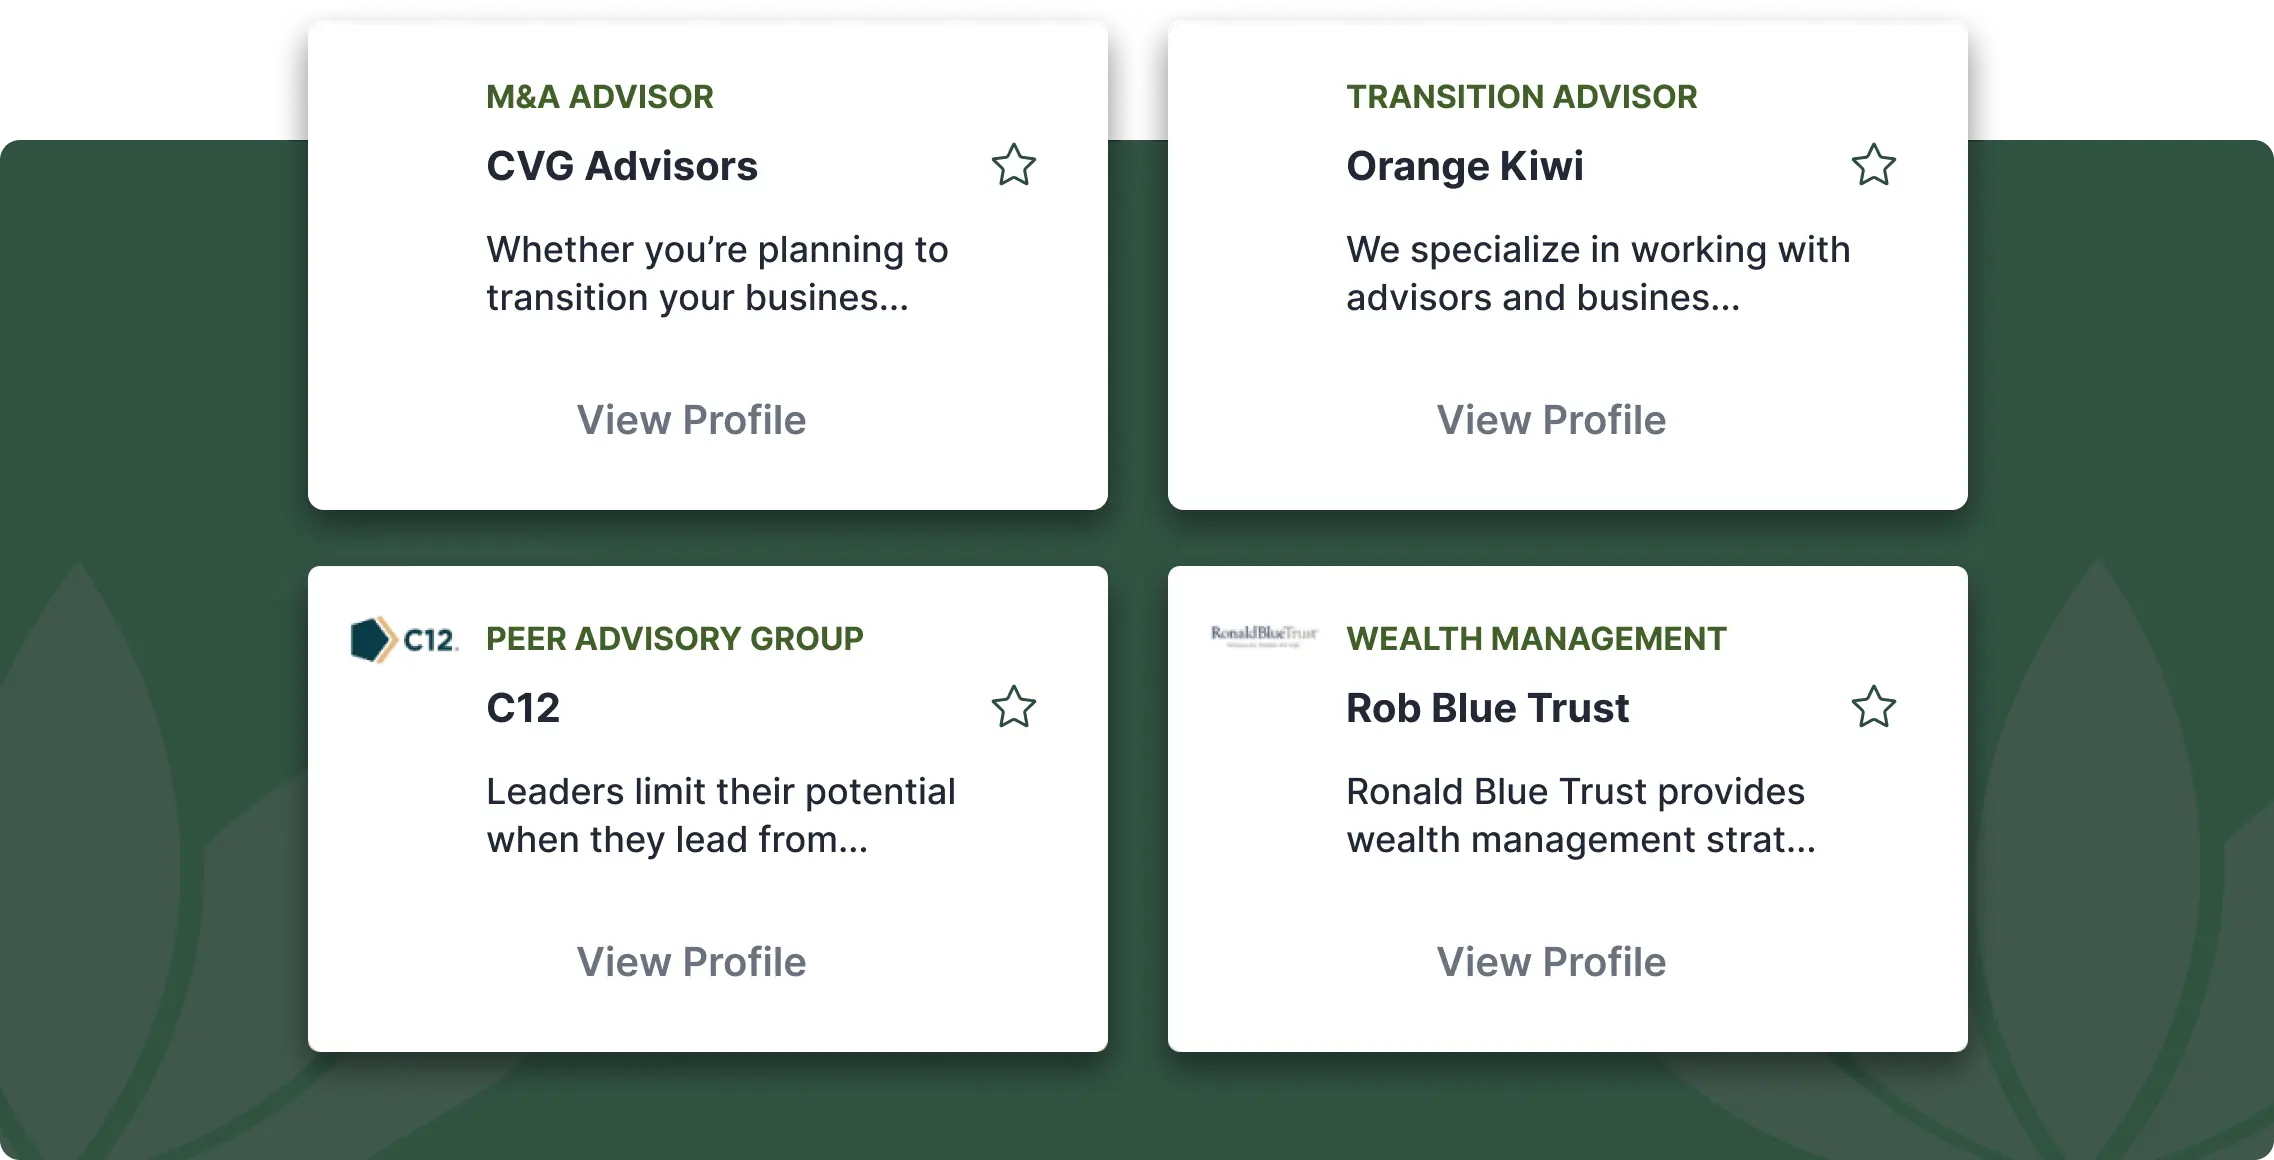 Card-style UI elements display different advisors and their specialties within Trelus, with clear buttons allowing access to full profile information